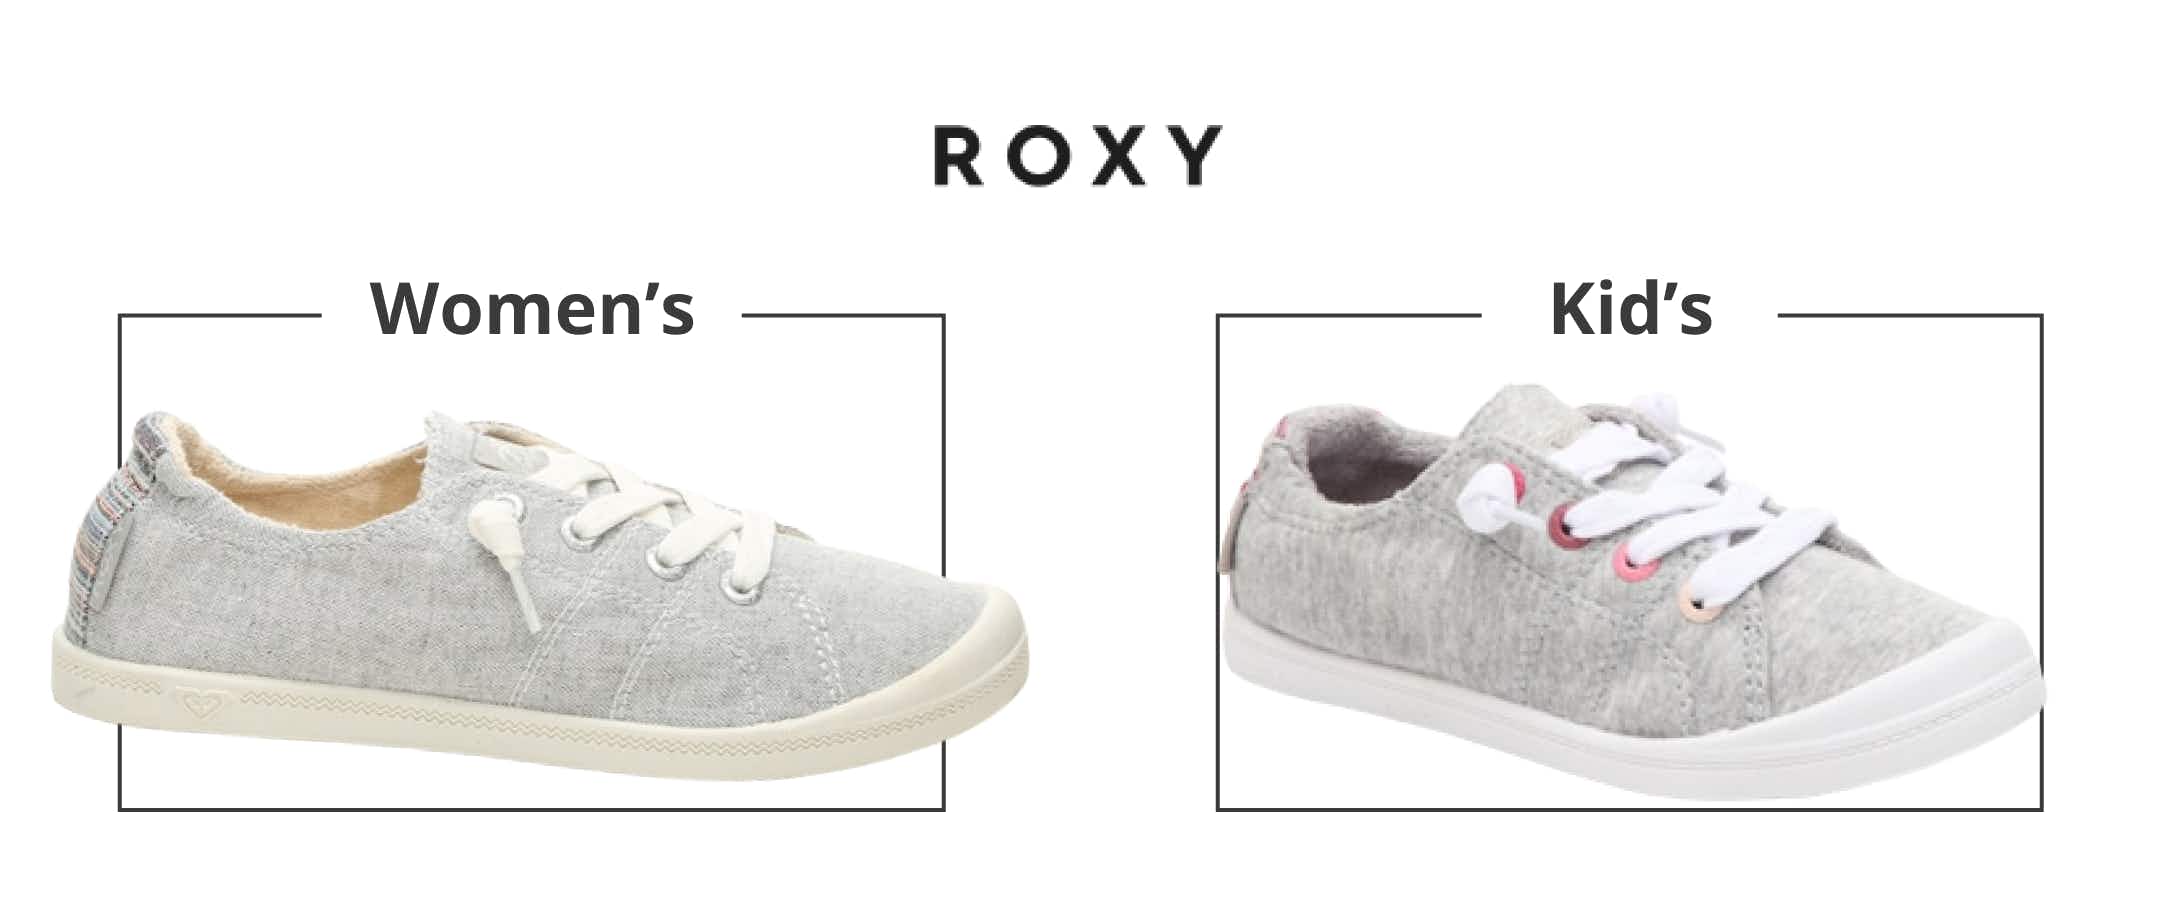 A comparison of a kid's and women's Roxy shoe